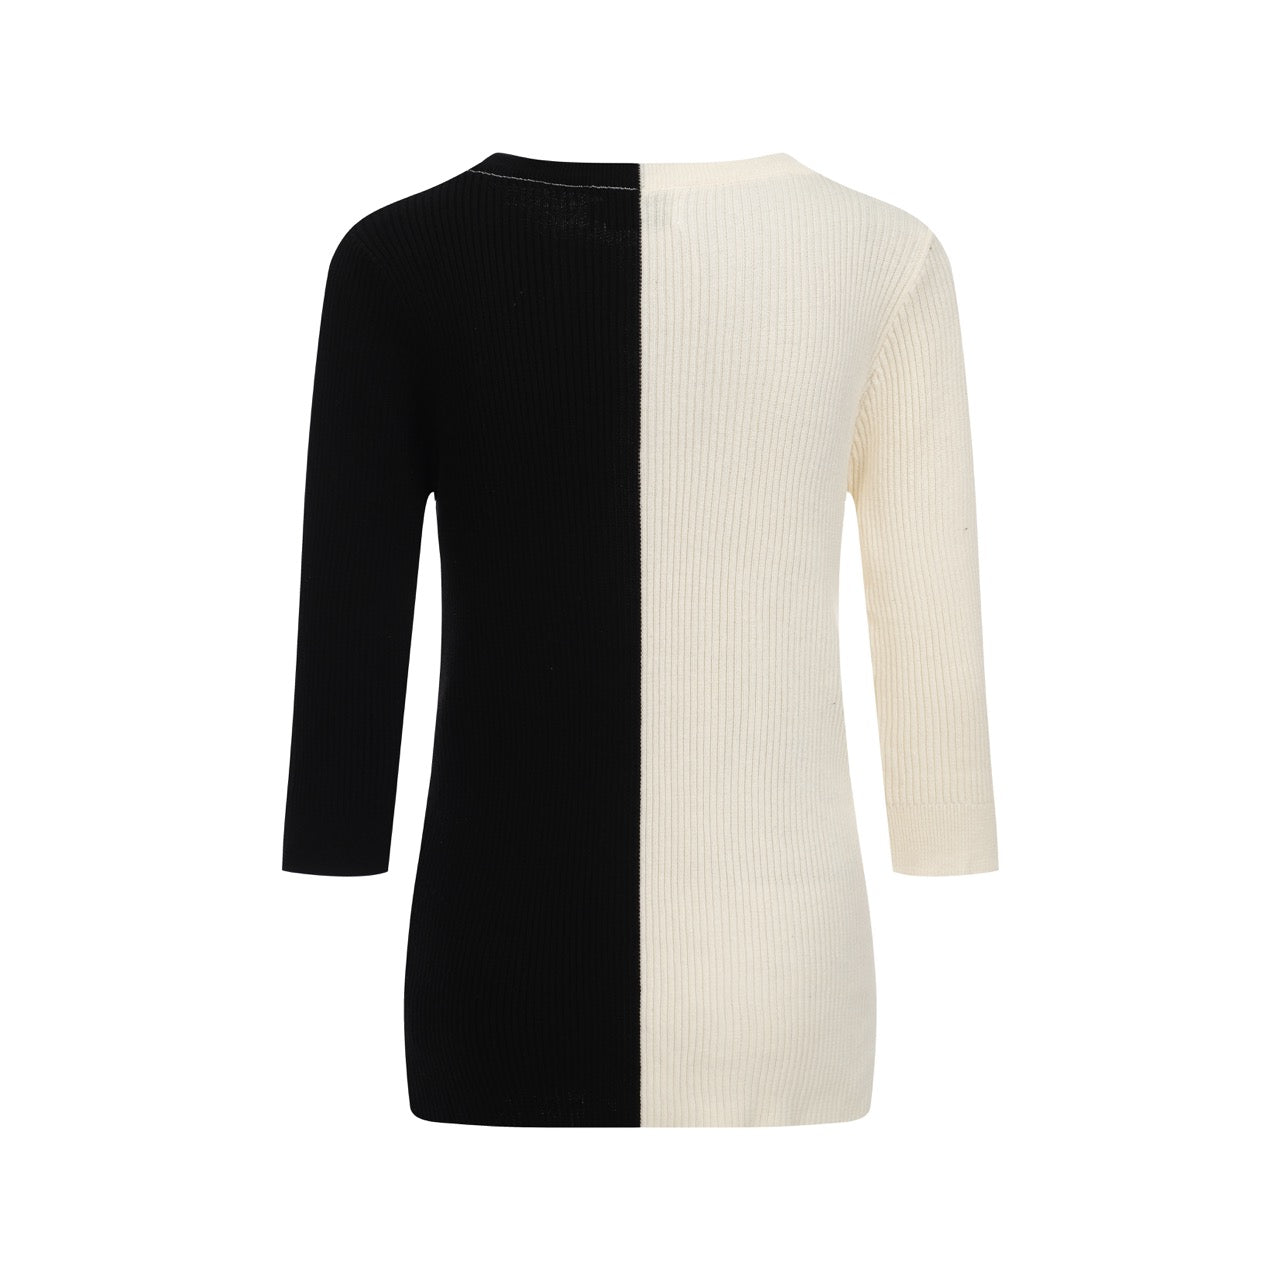 Women's Black&White Contrast Elbow-length Sleeve Knitted T-shirt